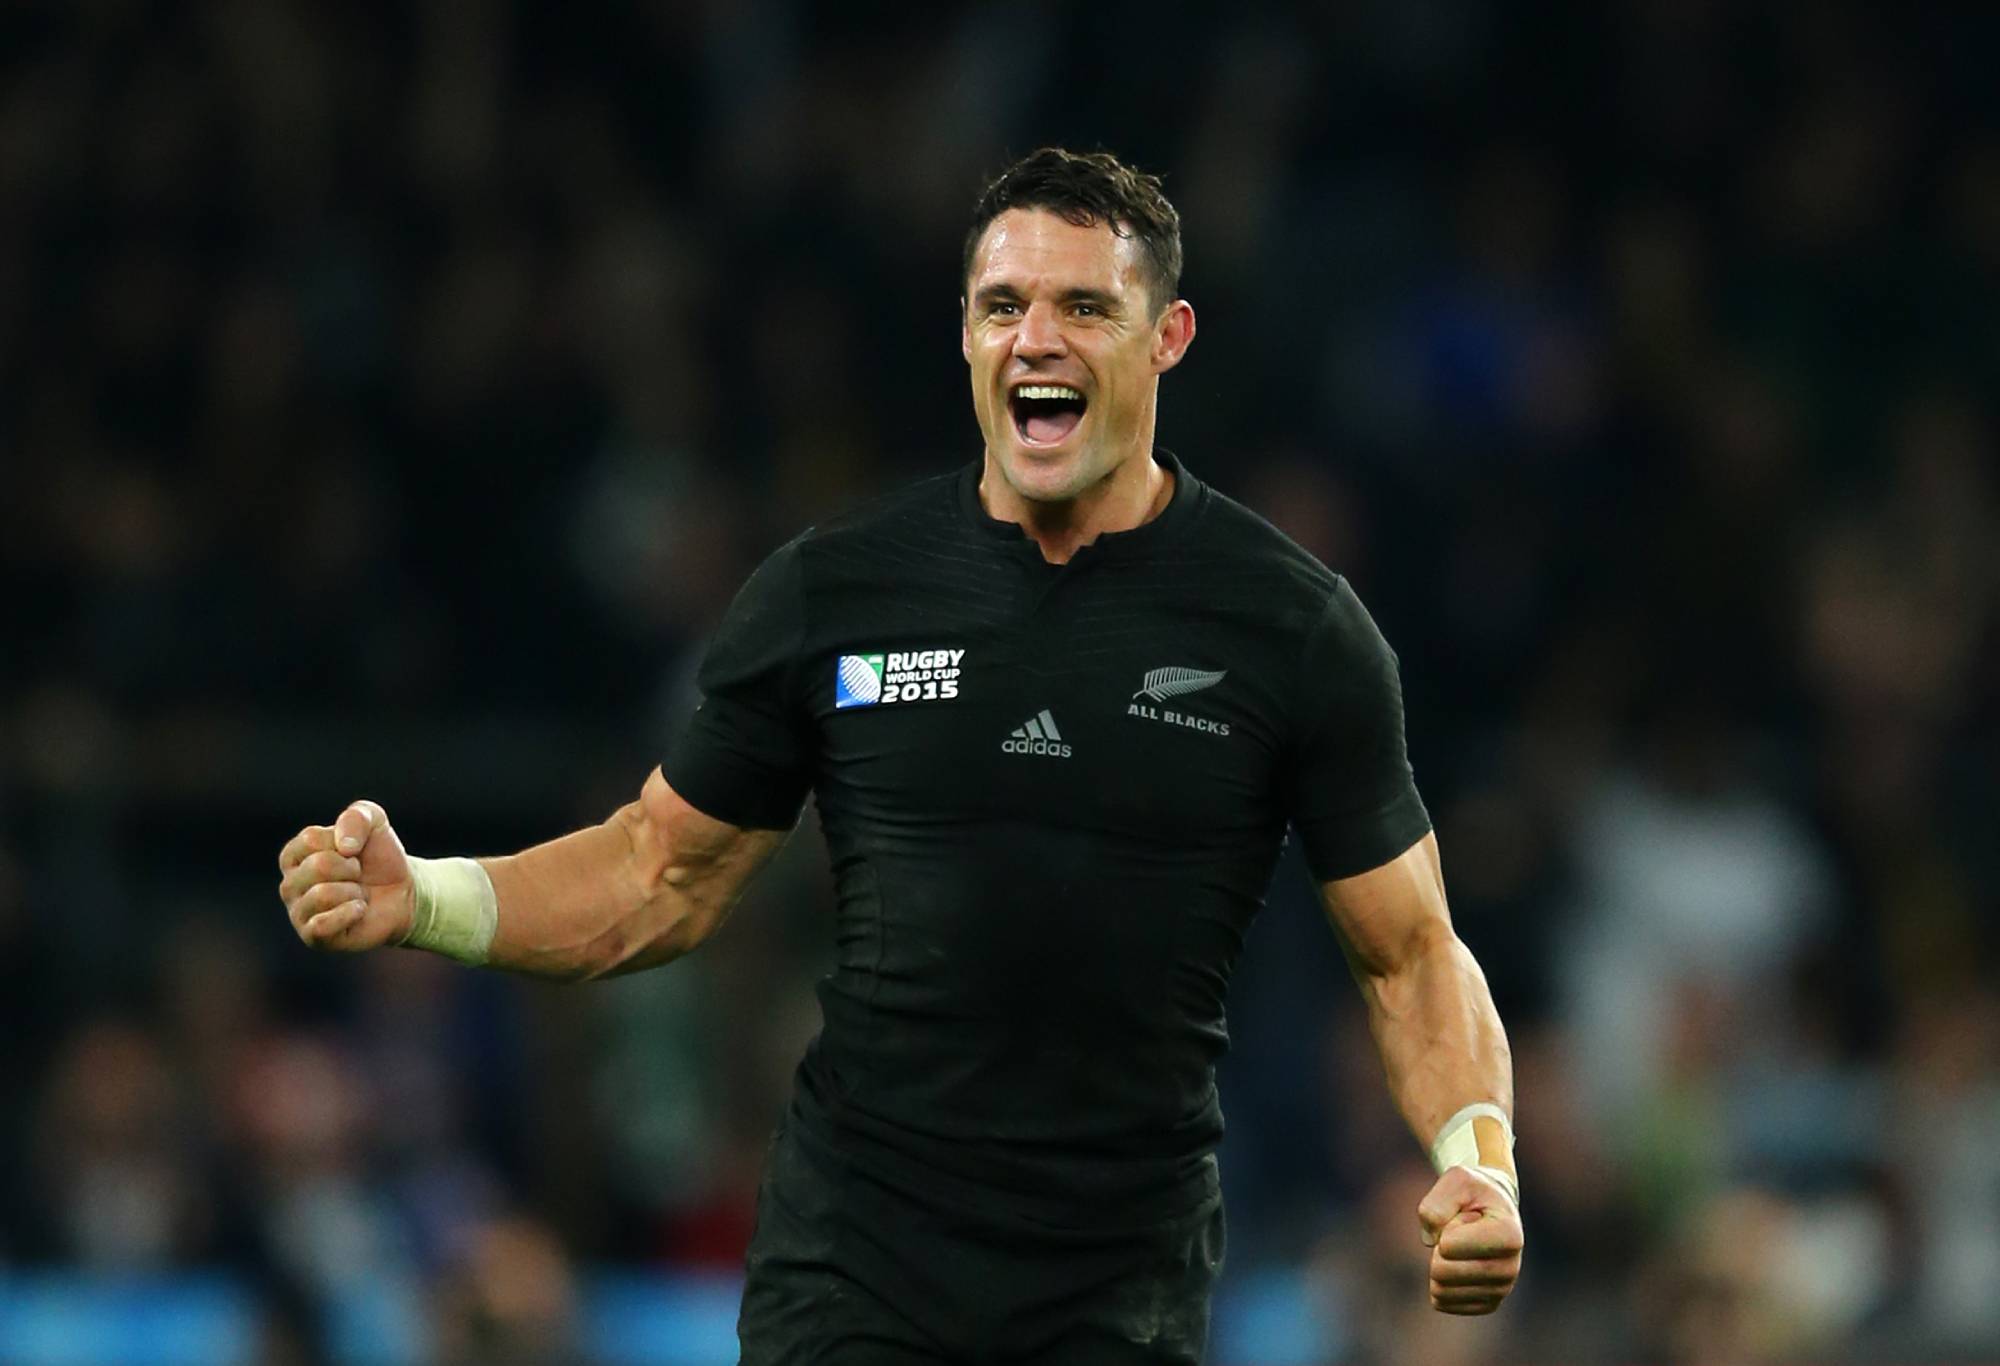 Dan Carter of the New Zealand All Blacks celebrates victory at the final whistle during the 2015 Rugby World Cup Final match between New Zealand and Australia at Twickenham Stadium on October 31, 2015 in London, United Kingdom. (Photo by Richard Heathcote - World Rugby via Getty Images/World Rugby via Getty Images)